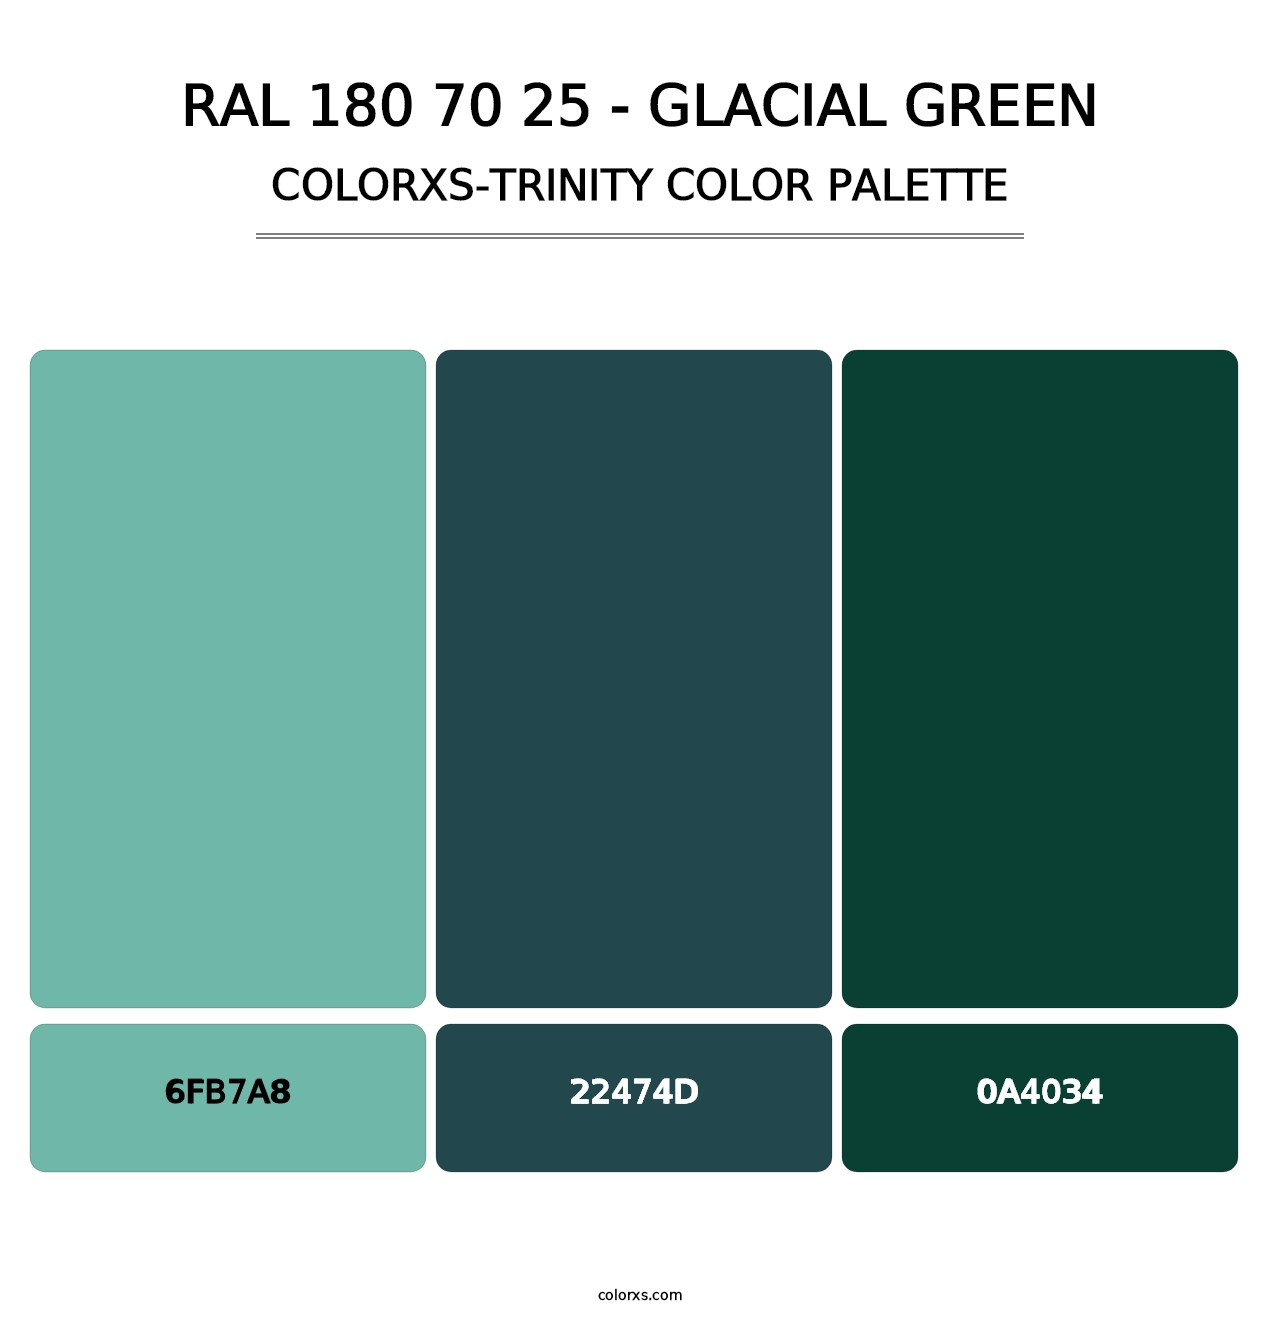 RAL 180 70 25 - Glacial Green - Colorxs Trinity Palette